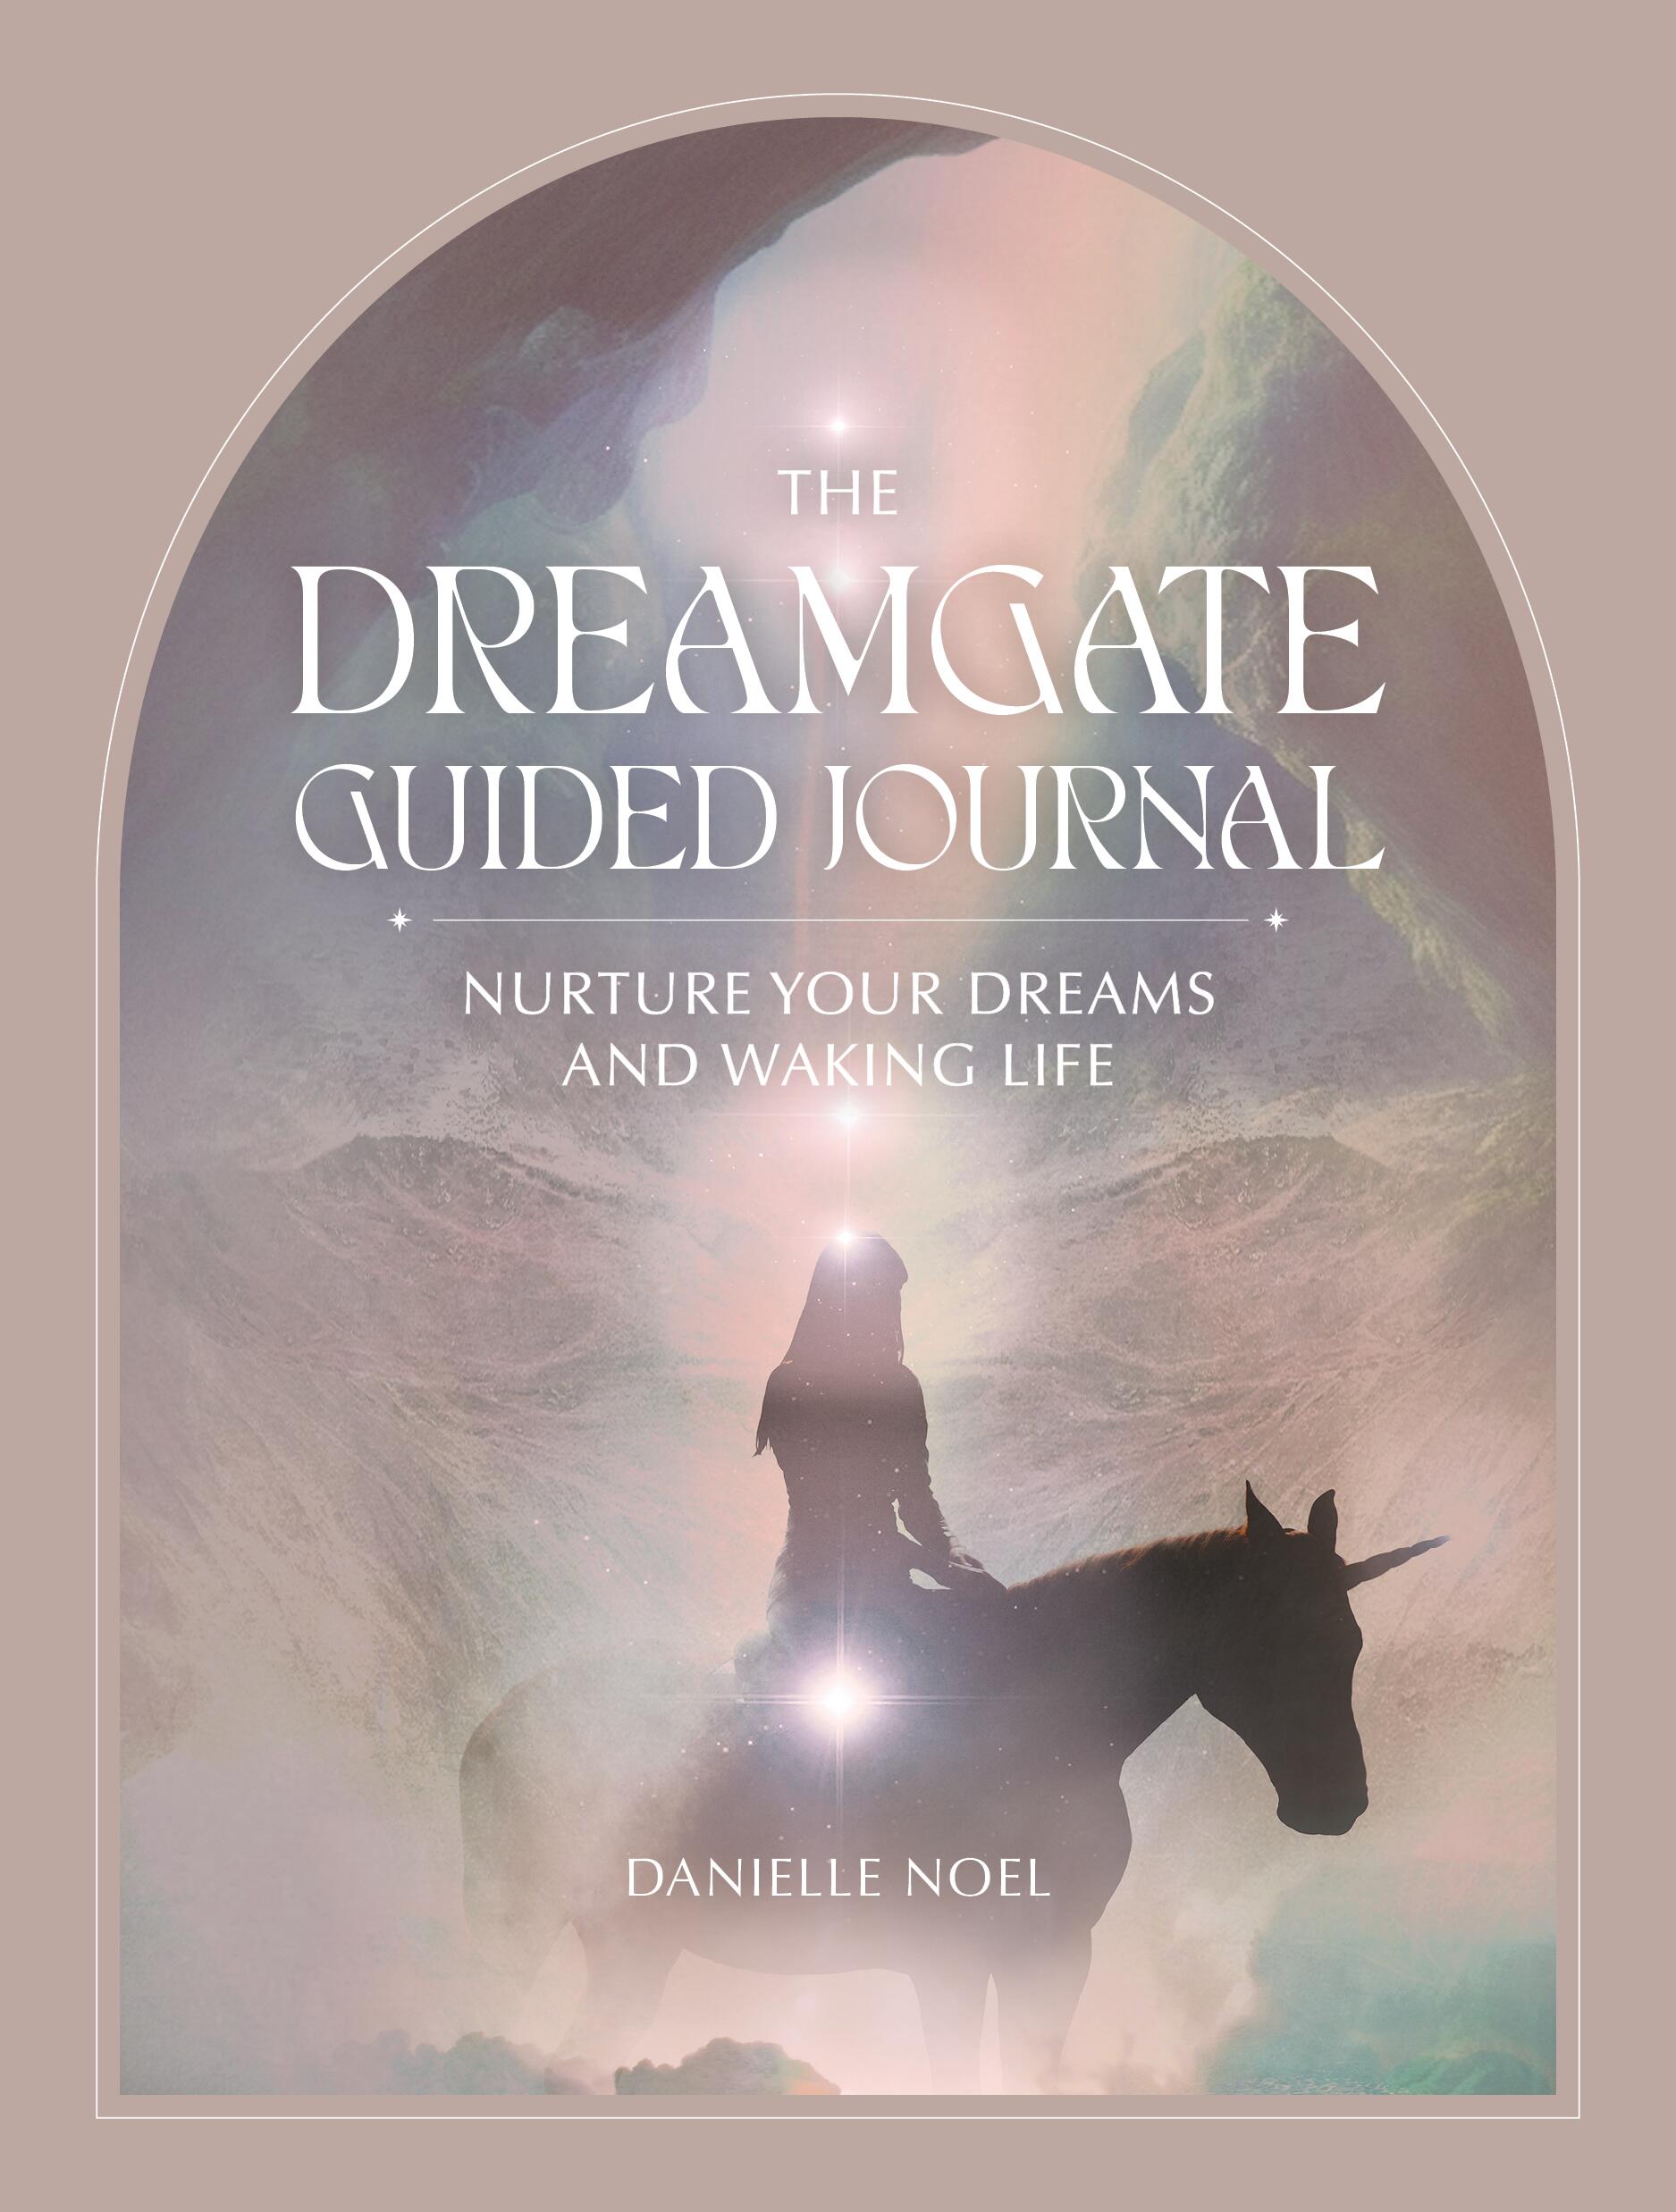 Dreamgate Guided Journal, The